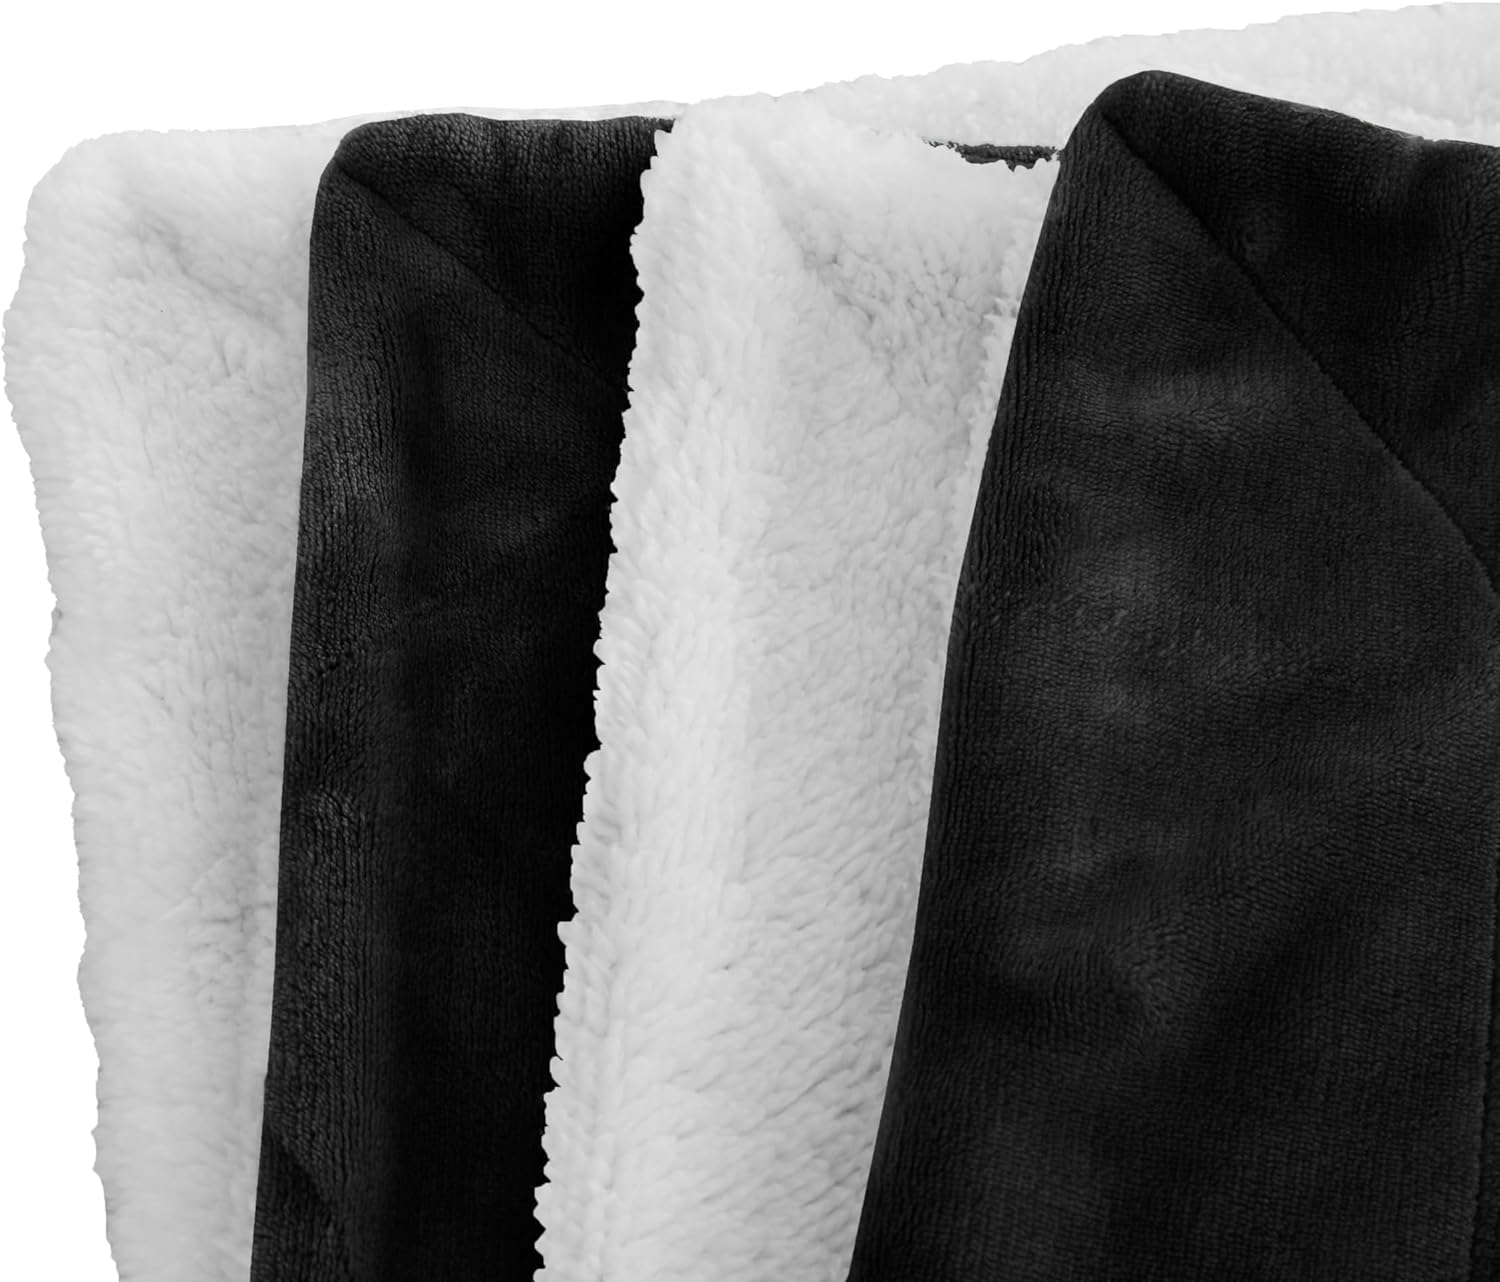 sherpa blanket, Black blankets for bed and sofa,fleece throw sofa bed blankets, warm blankets, cozy warm fur blankets, soft sherpa blankets, blankets for all, universal blankets, winter blankets, summer blankets